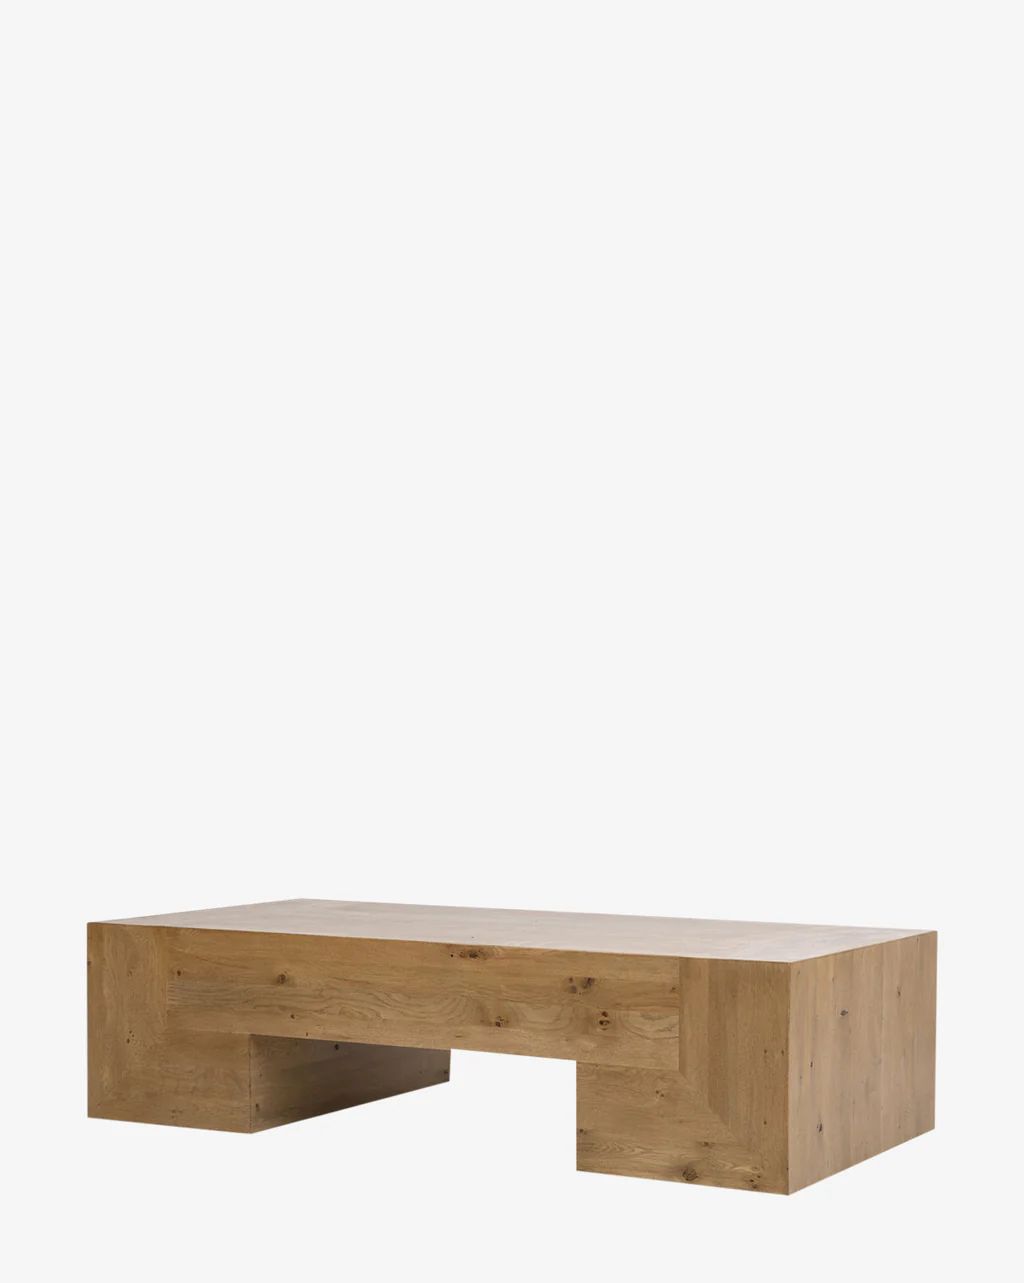 Ryle Coffee Table | McGee & Co.